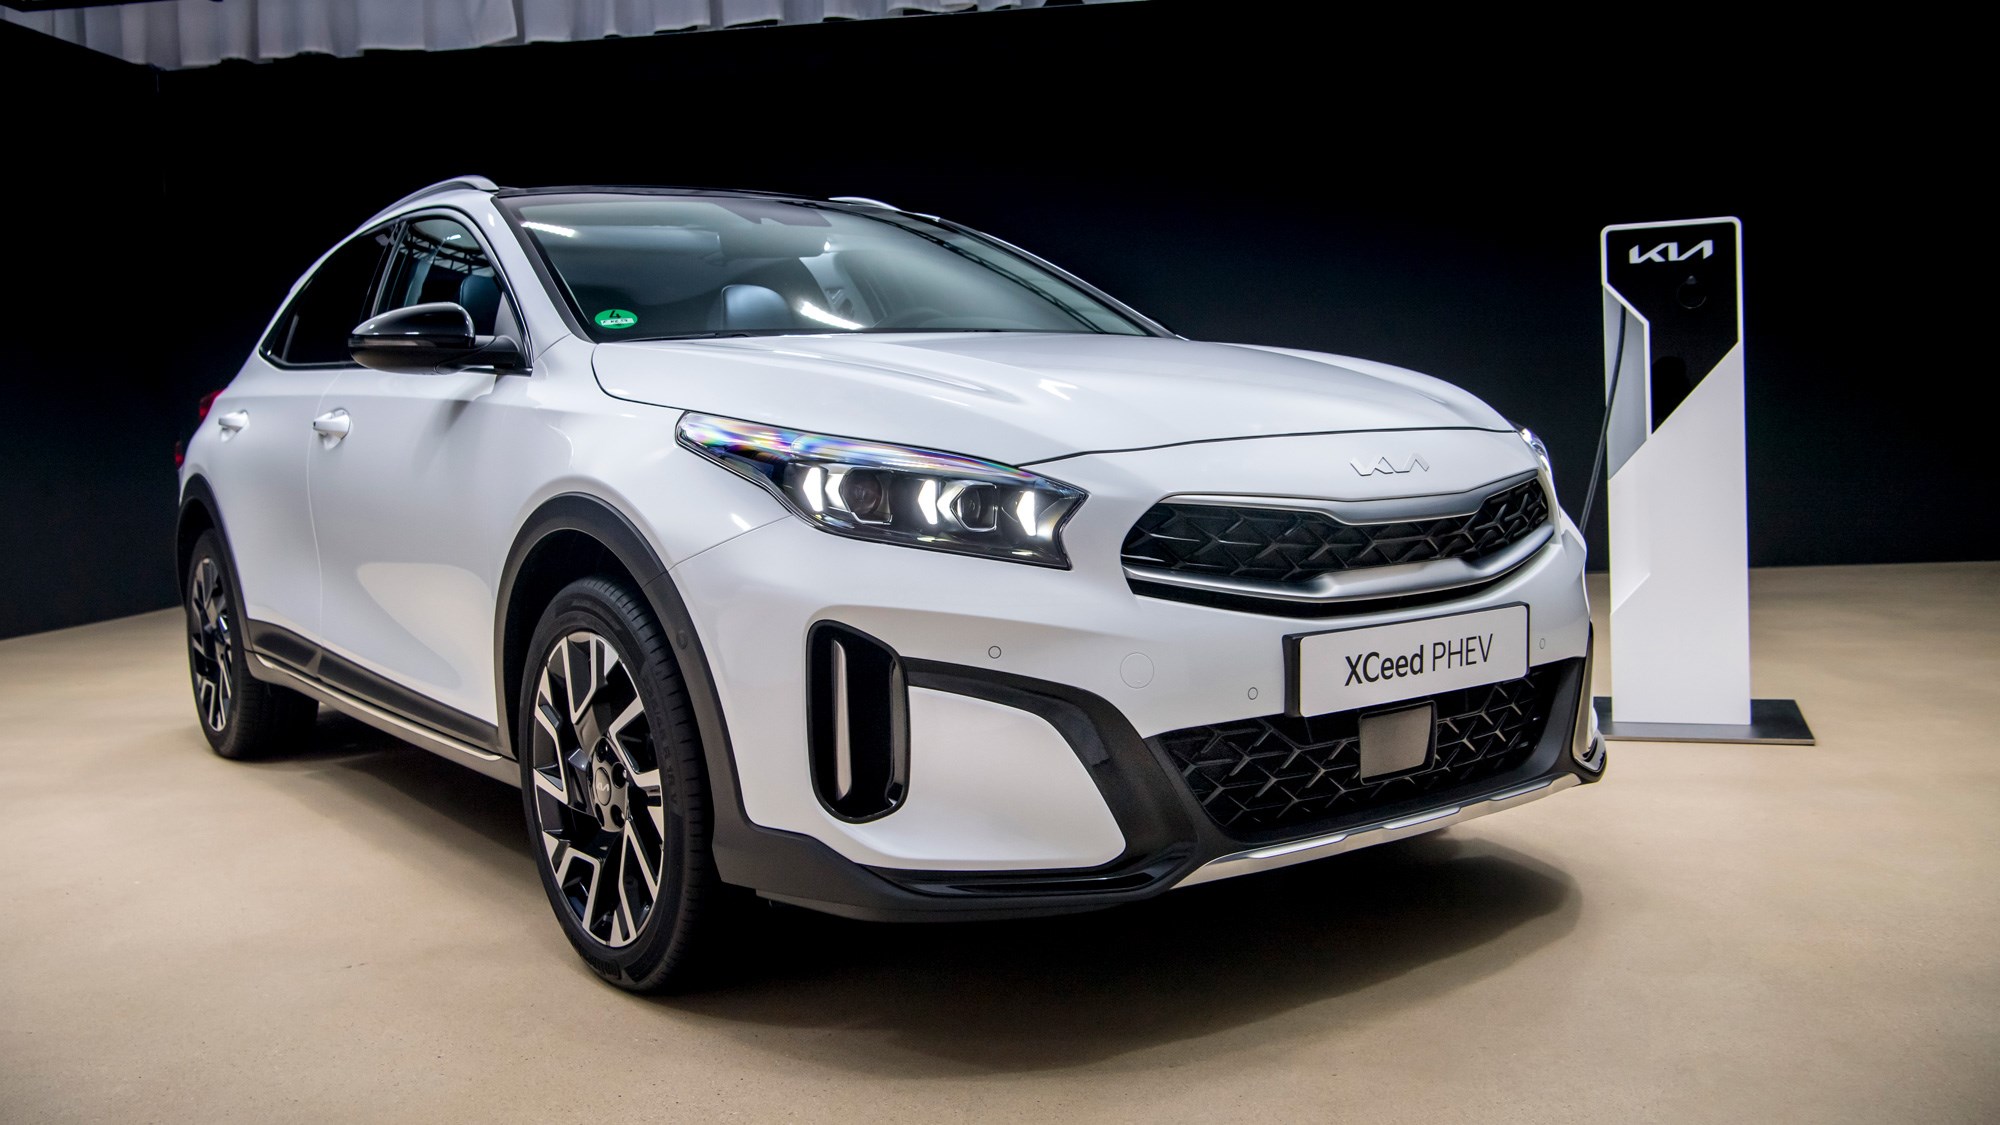 New 2022 Kia XCeed facelift on sale in the UK now priced from